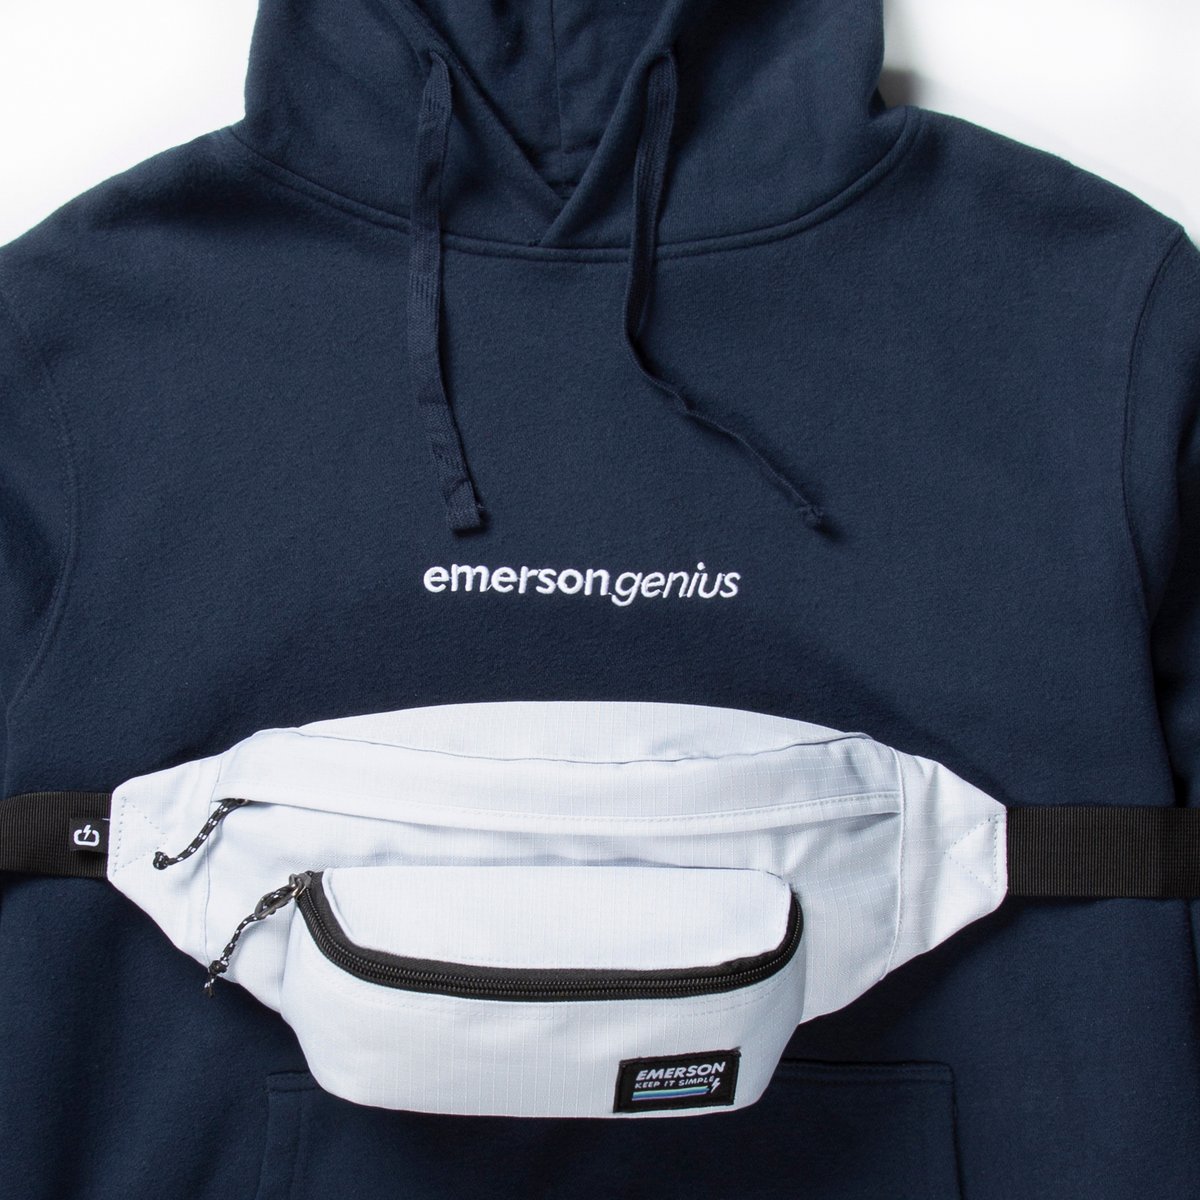 Emerson Genius Pullover Hoodie With Emerson Genius Embroidery Emerson Waist Bag With An Extra Front Zip Compartment Click T Co Mlm1kxedr9 For More Emerson Emersongenius Emersoncompany Keepitsimple Fw T Co